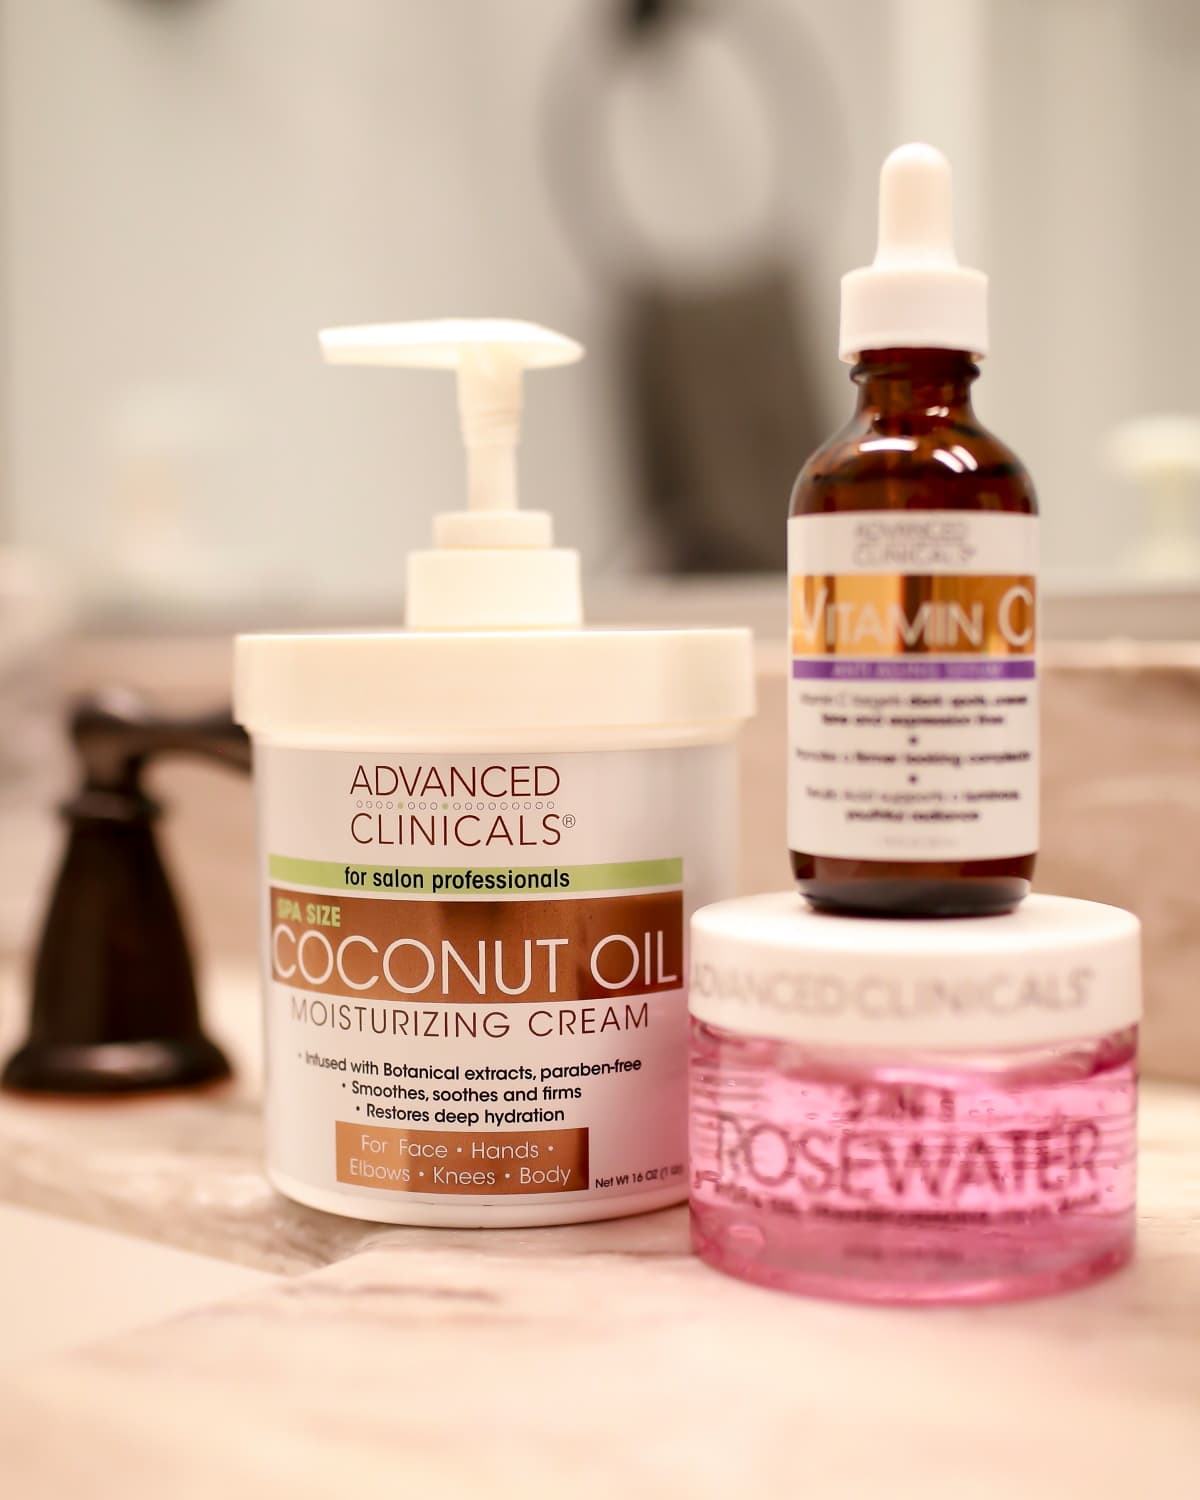 #vitamincserum #coconutoilskincare You've heard great things about this local brand but have you read the Advanced Clinicals Reviews? I put the vitamin c serum, coconut oil cream and rosewater mask to the test. Here's what I found out! #facemaskforwrinkles